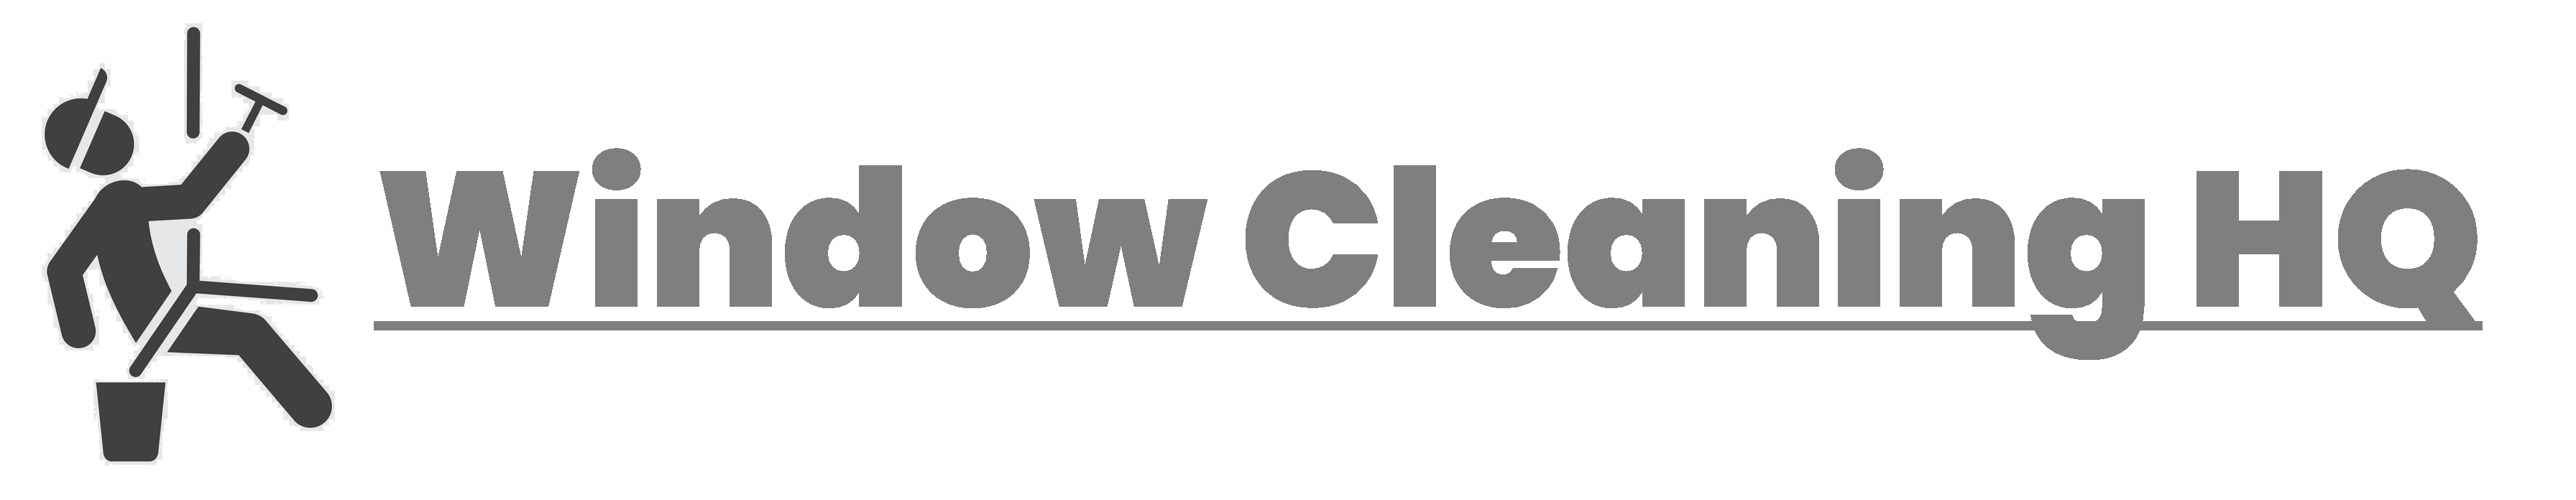 https://windowcleaninghq.co.za/wp-content/uploads/2021/04/Window-Cleaning-hq.png